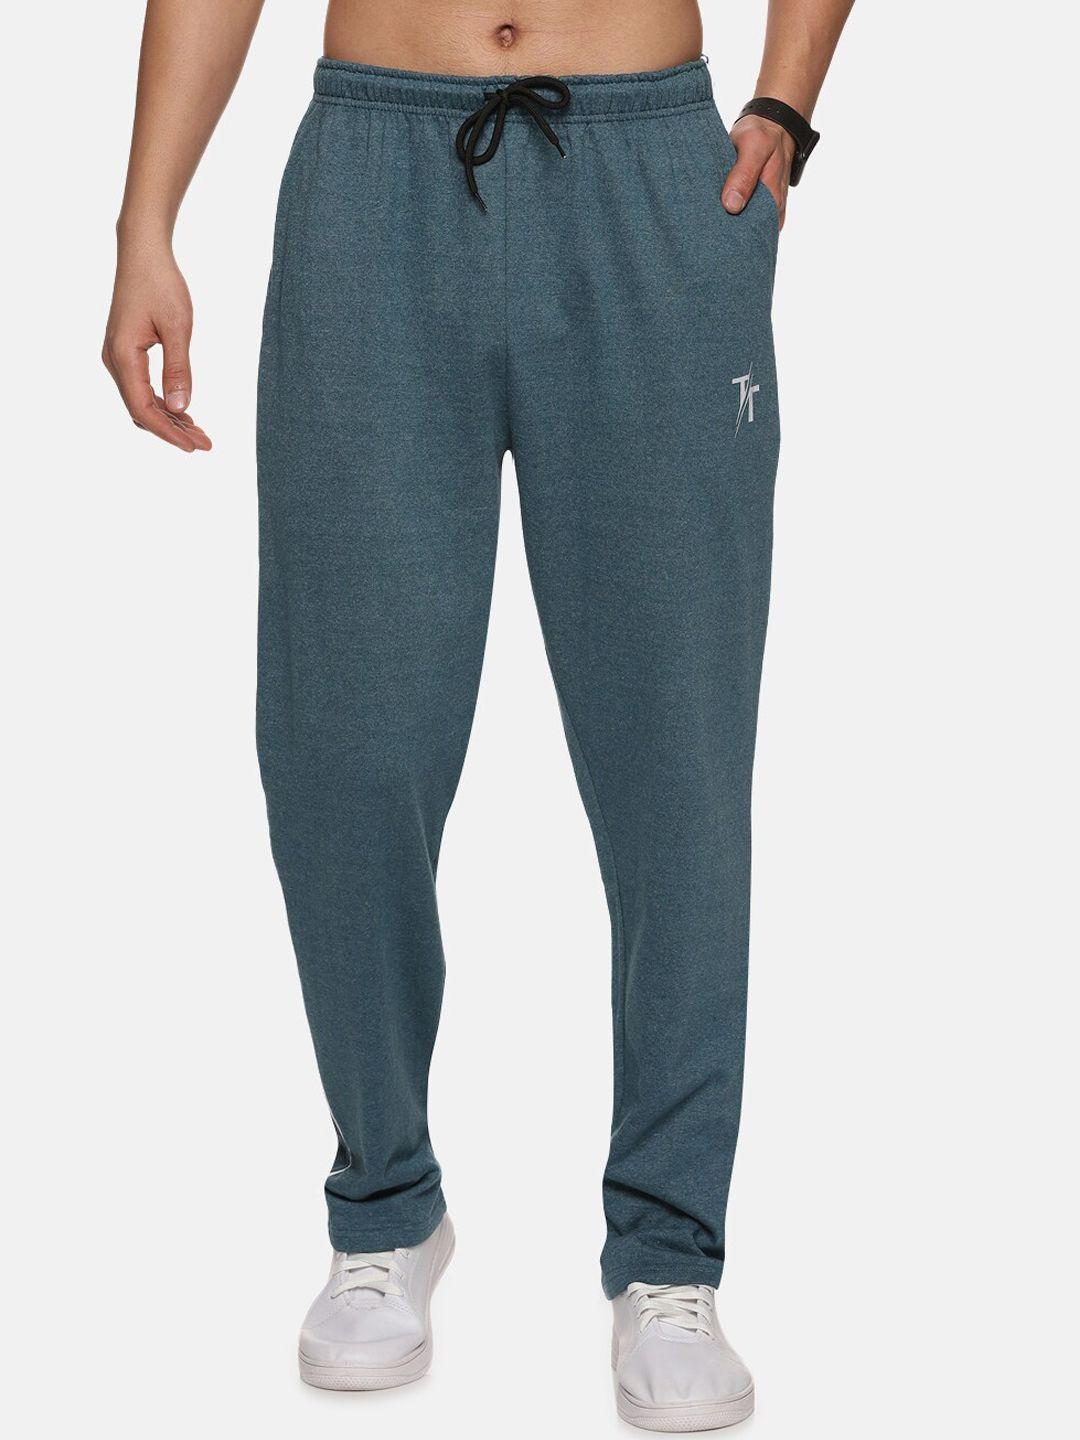 trends tower men cotton dry fit track pants